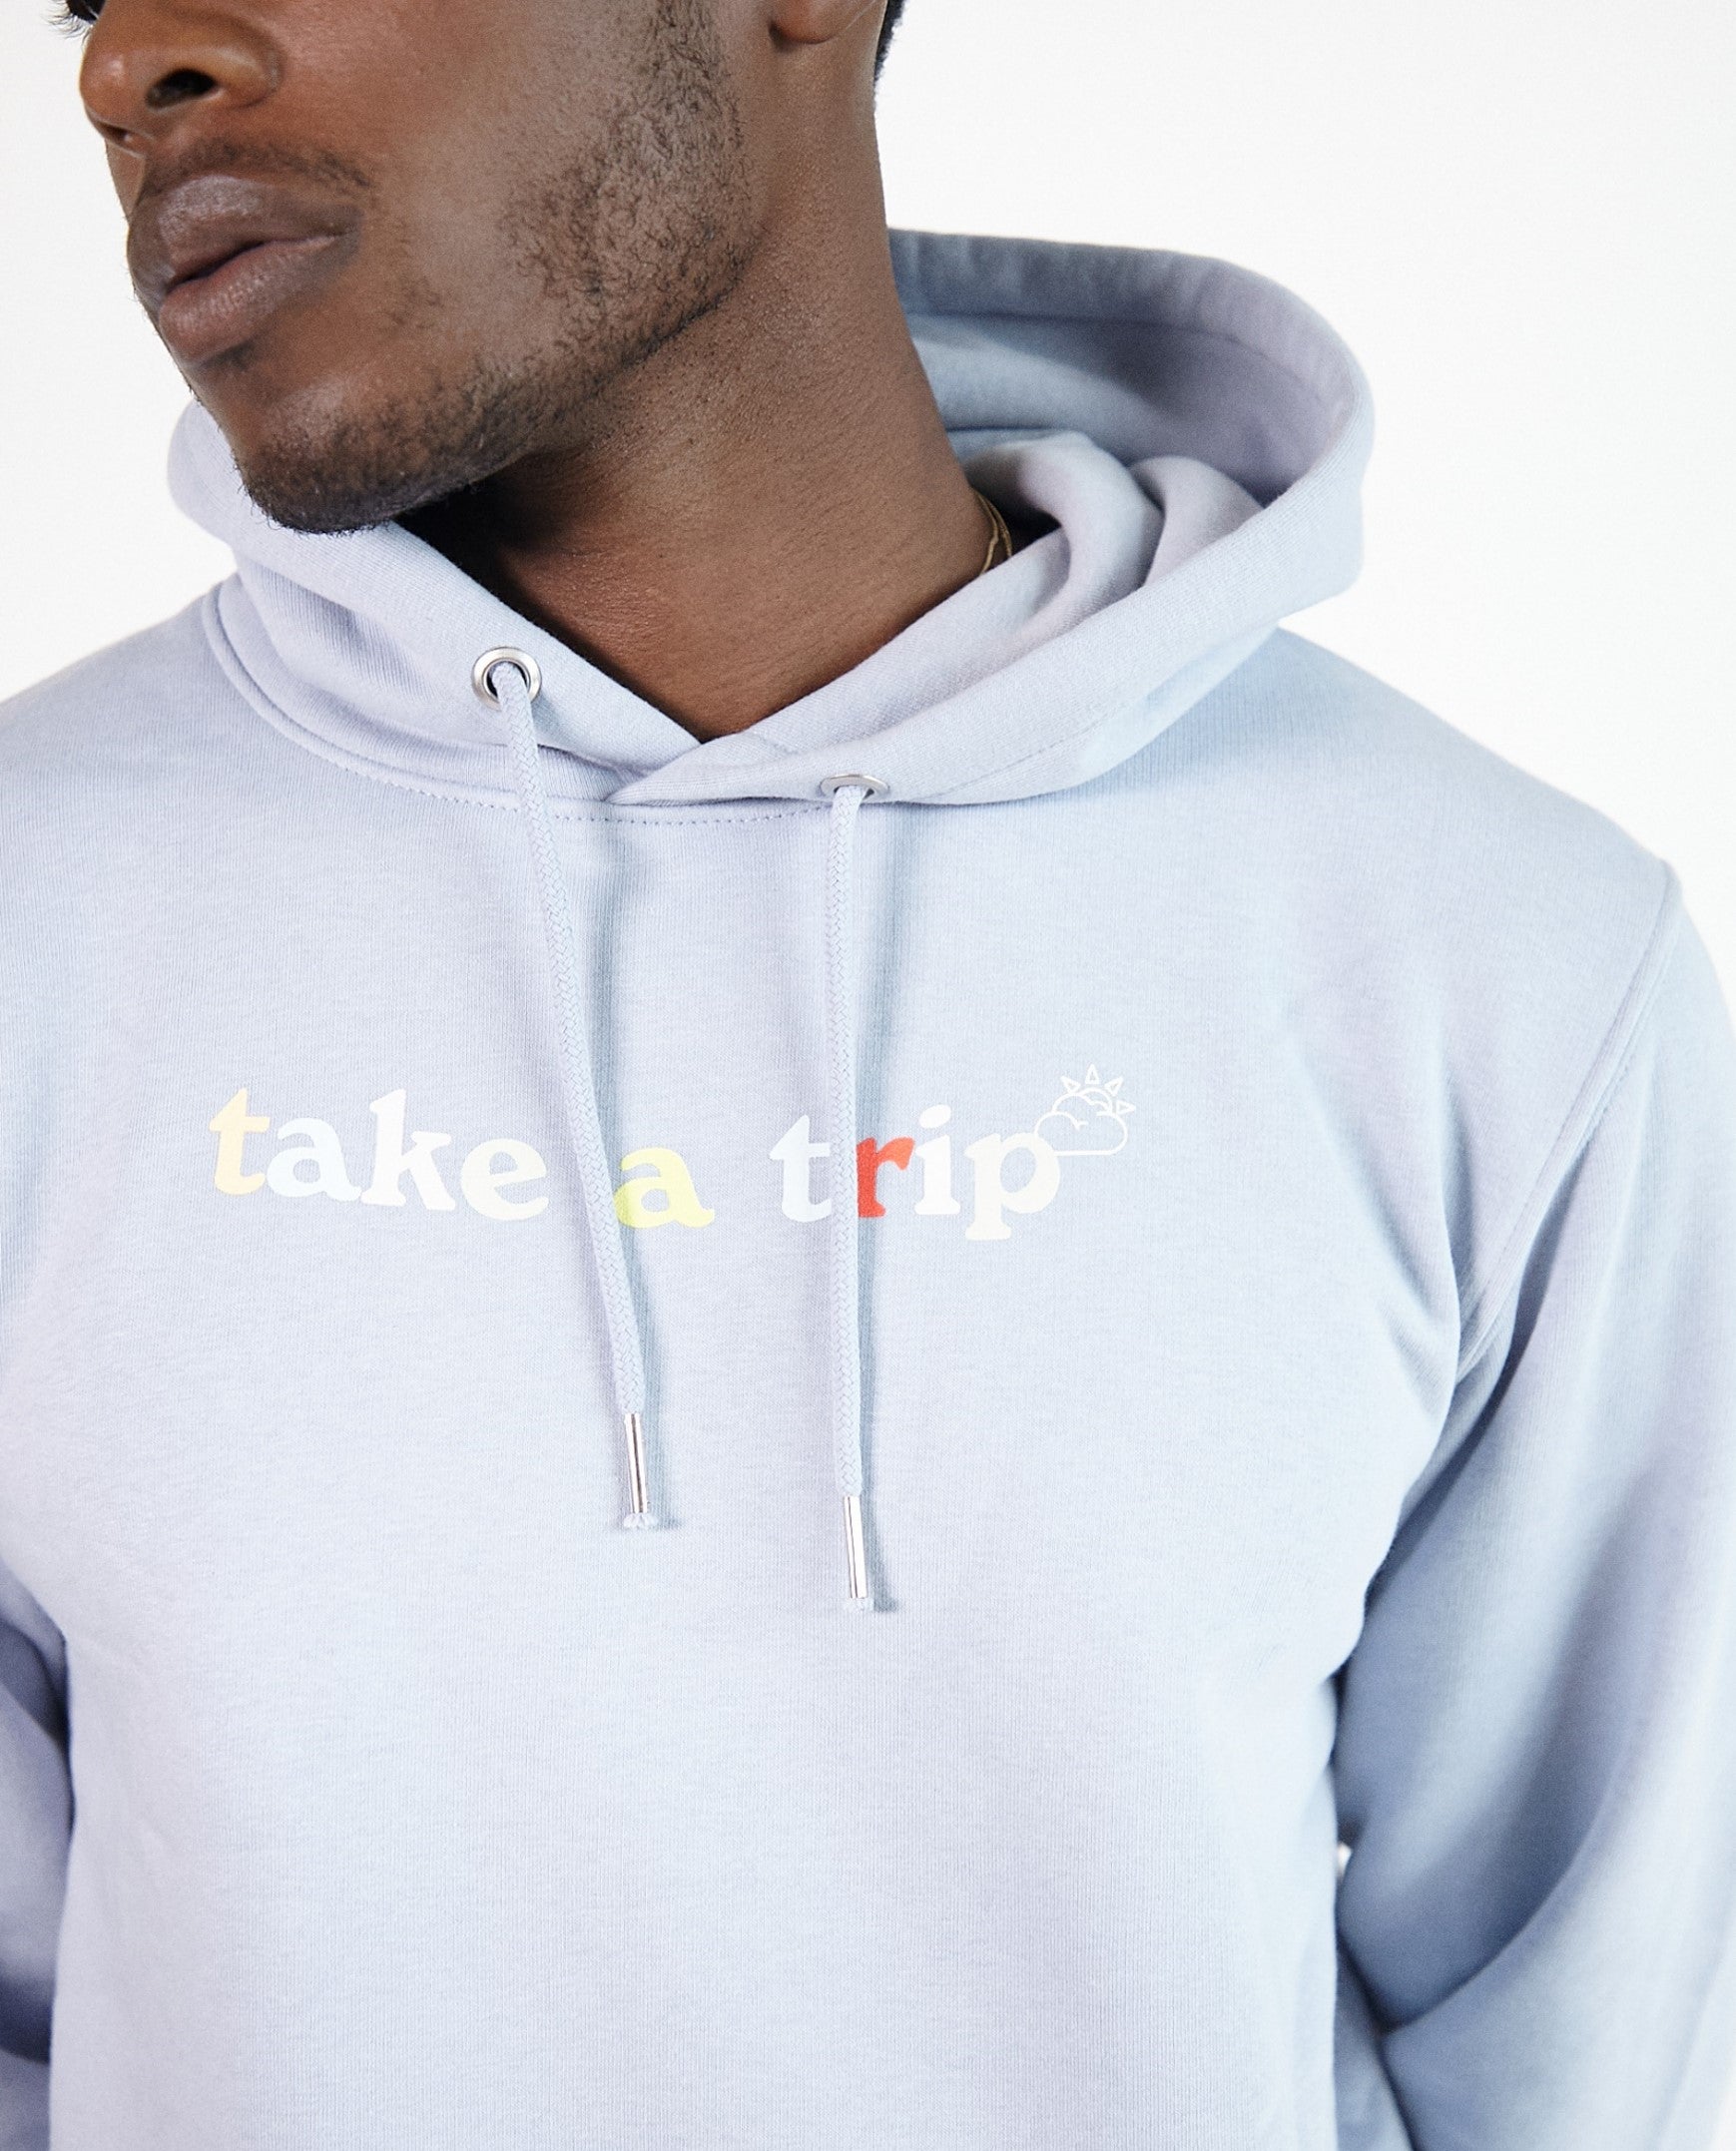 product-featured no-display take a trip hoodie blue new